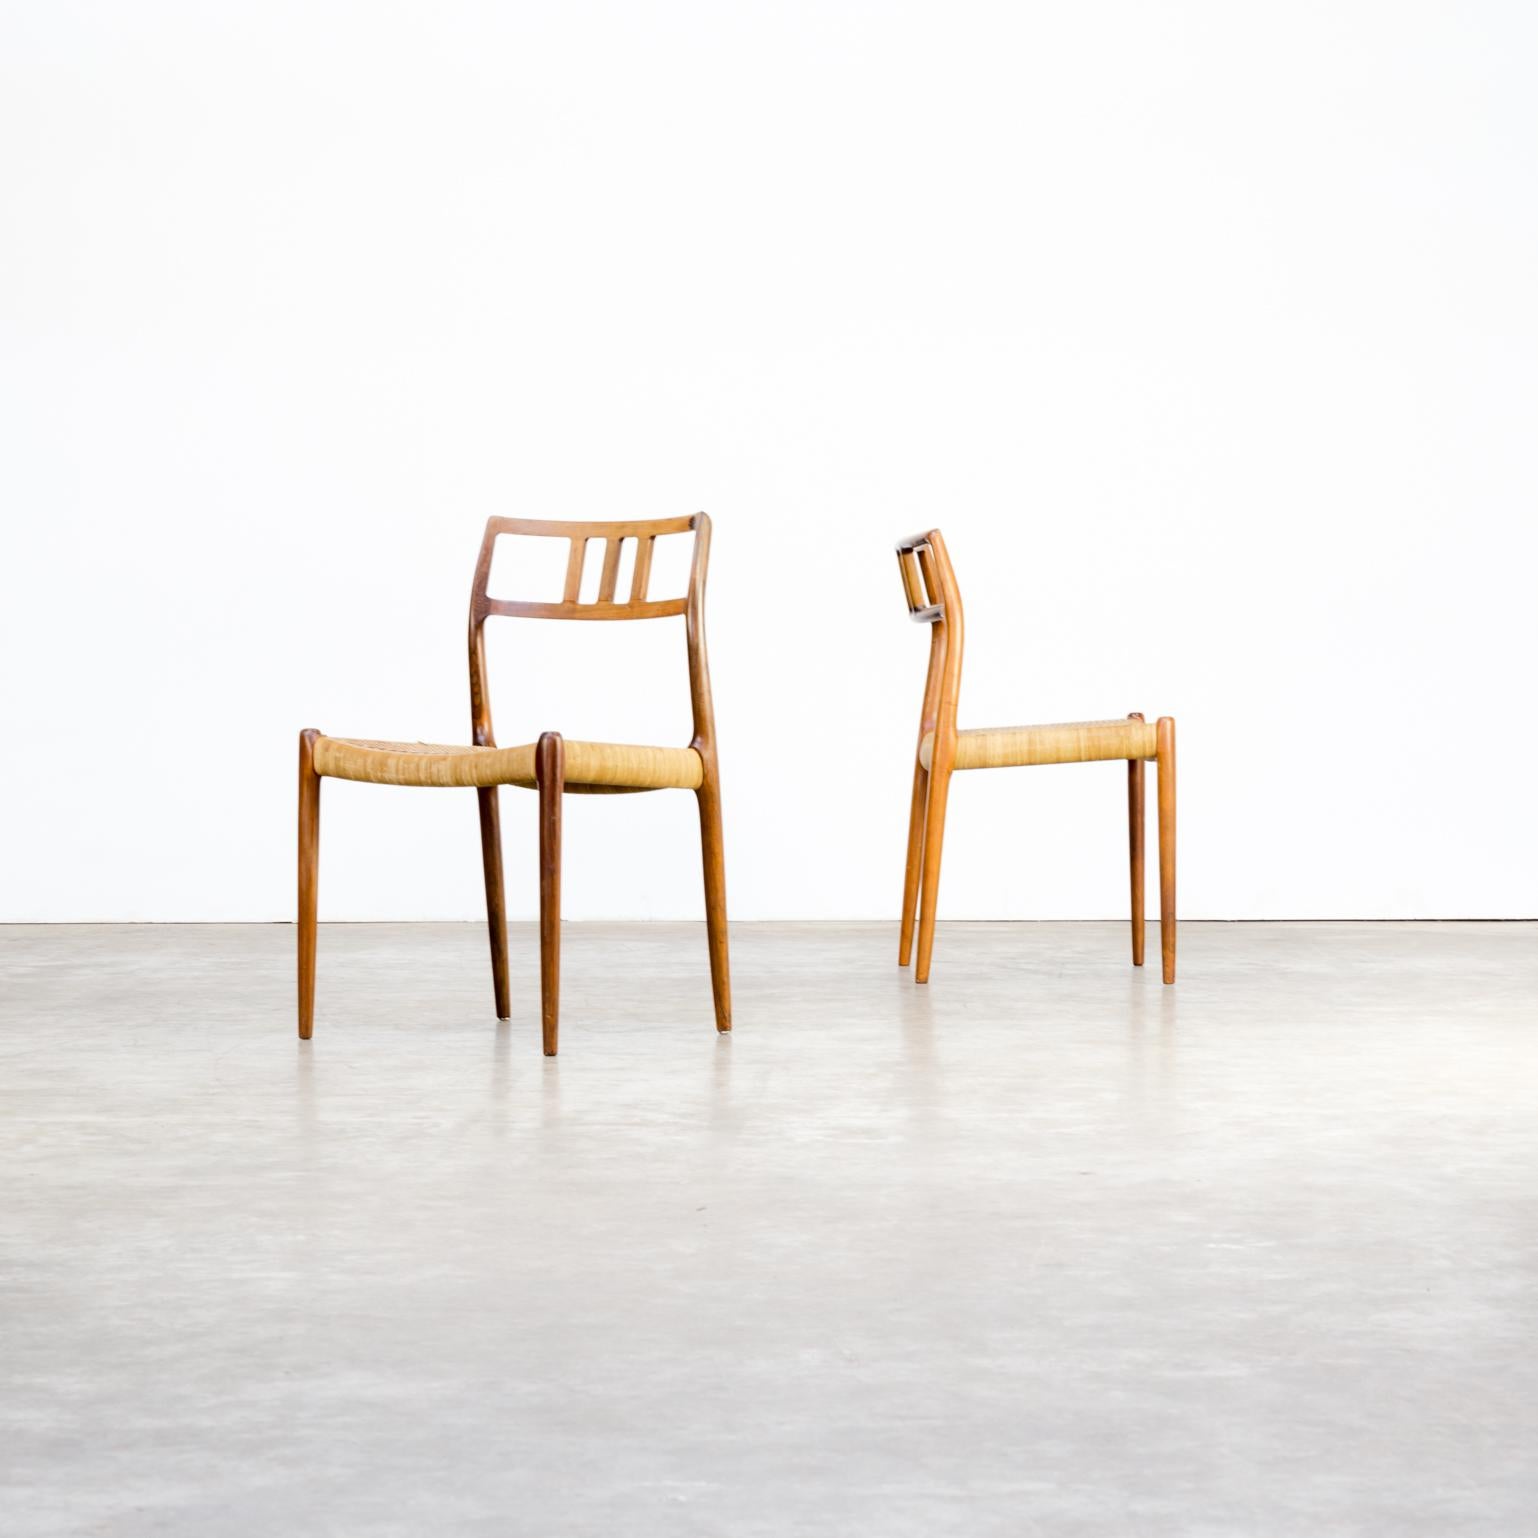 1960s Niels Otto Møller model 79 chairs for J.L Moller. Good condition consistent with age and use.